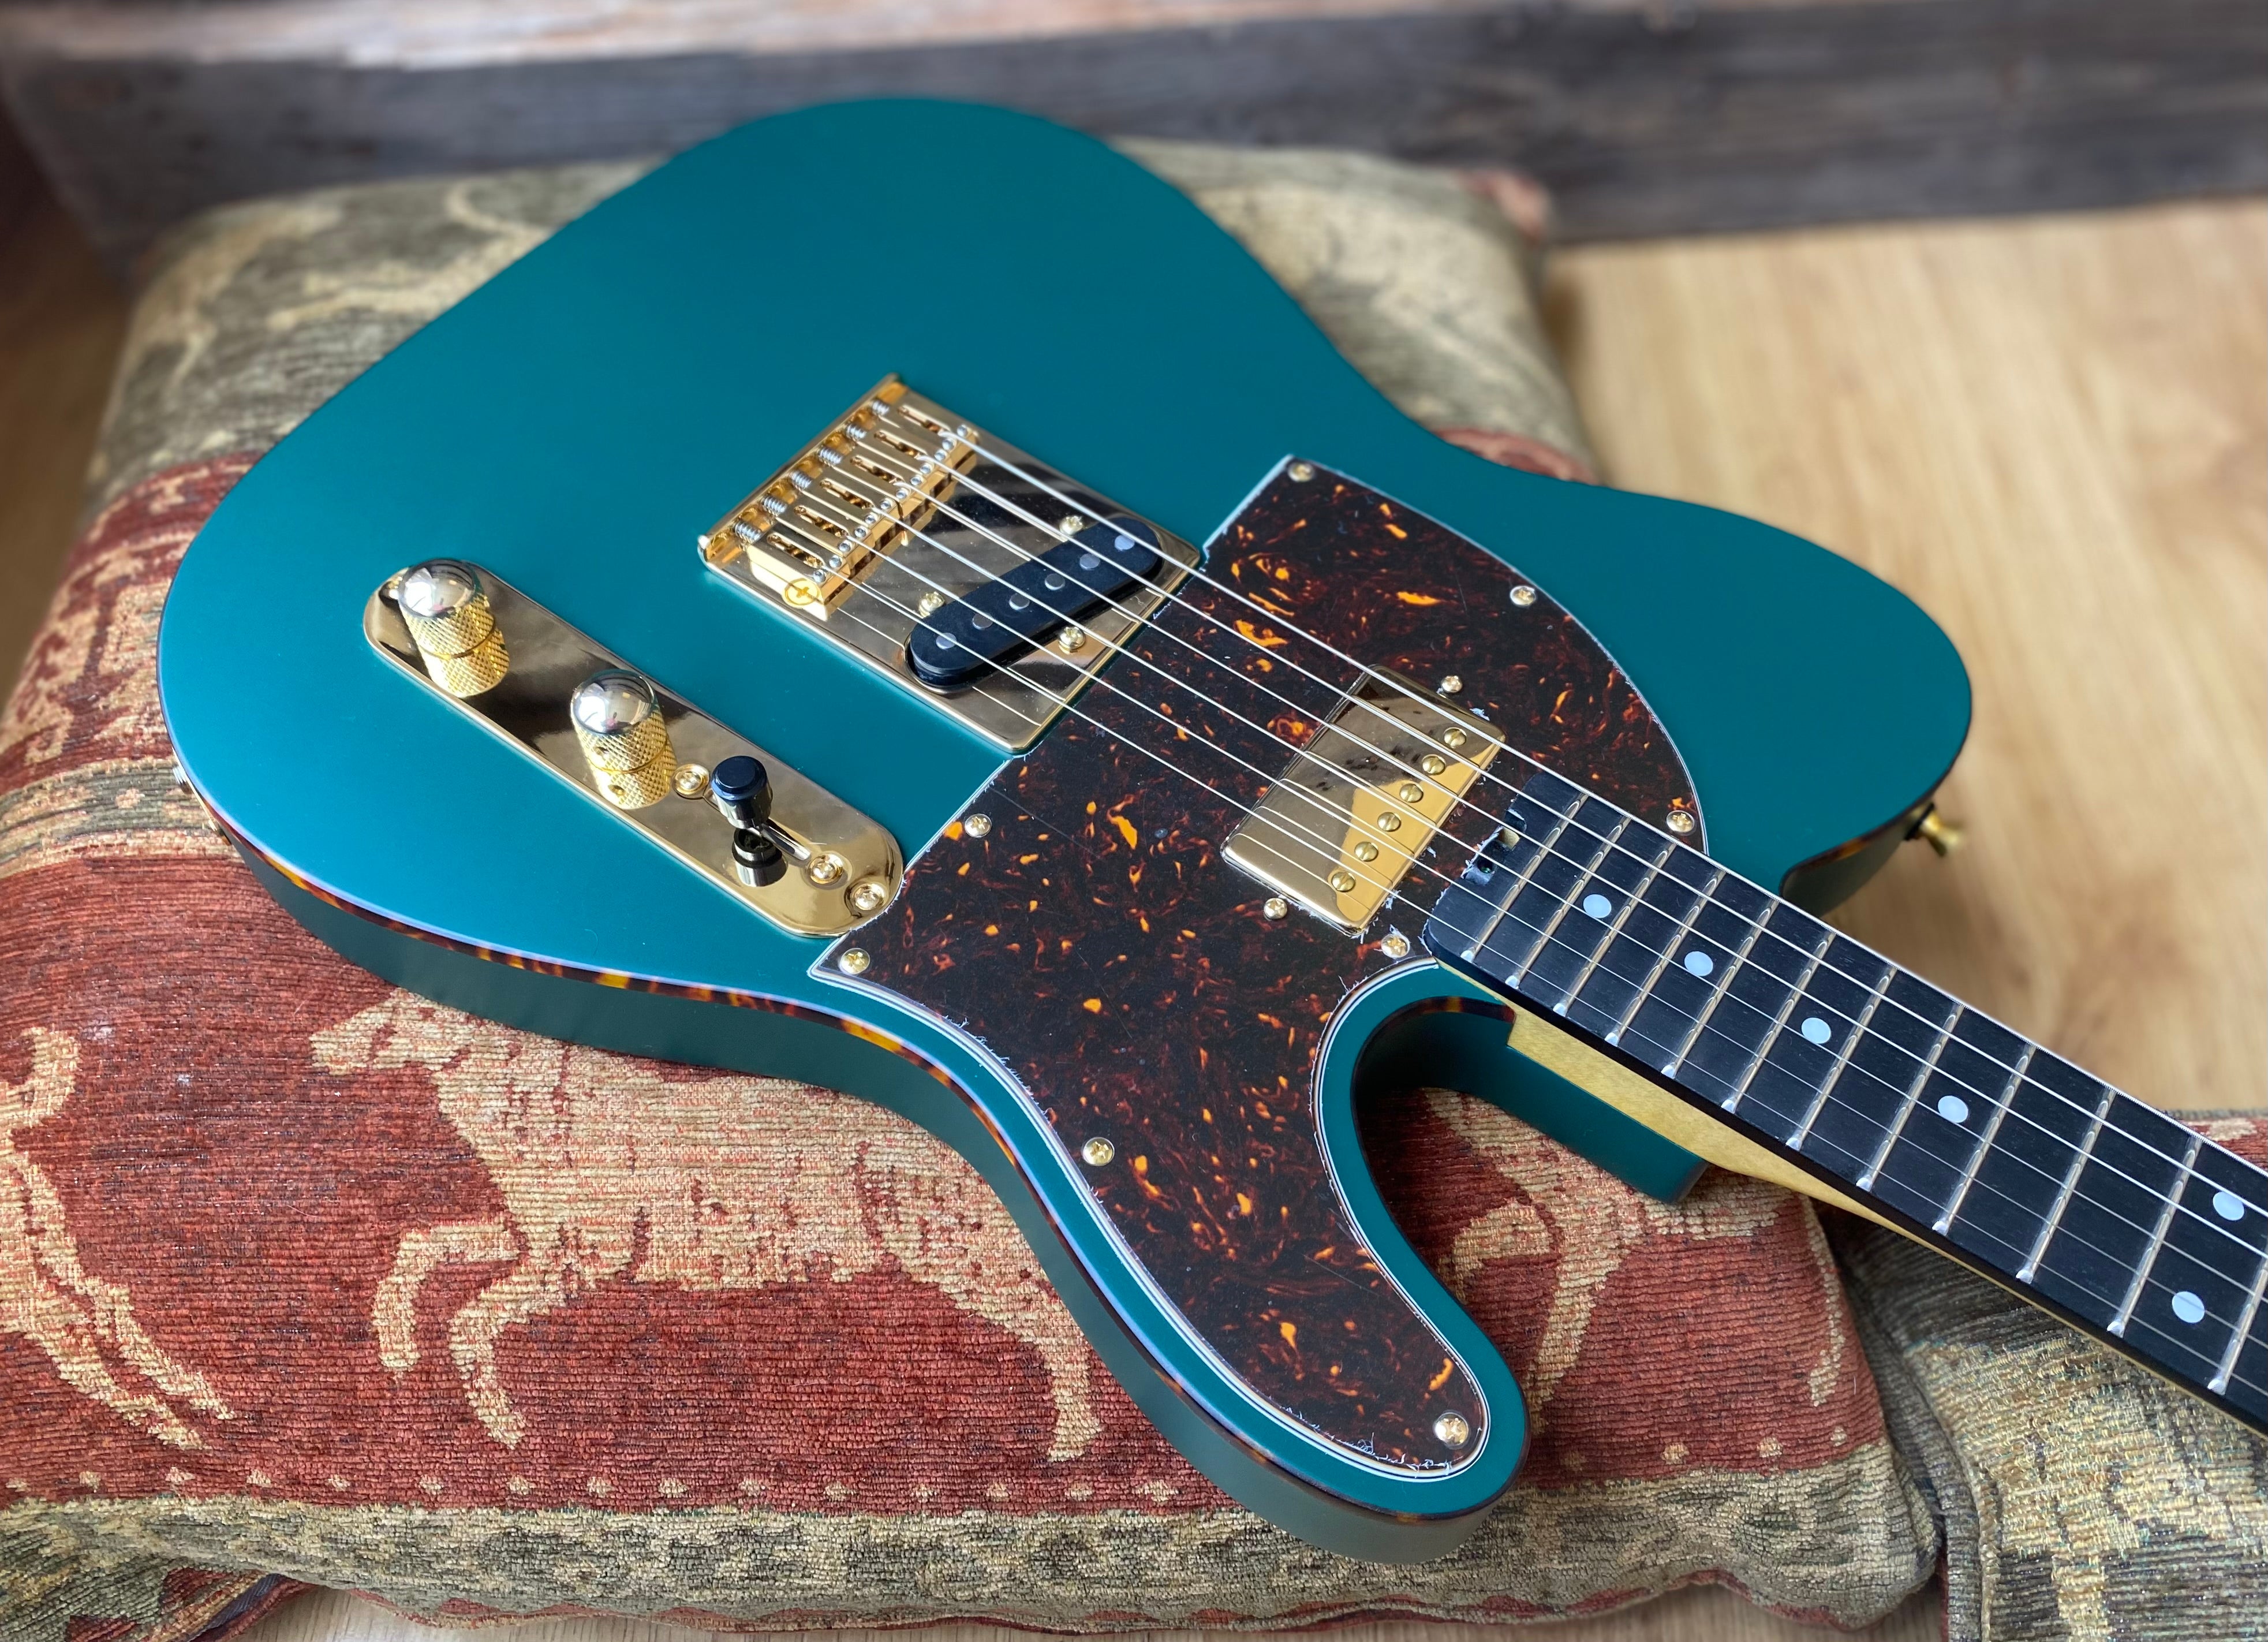 Gordon Smith Classic T HS "After 8" Custom, Electric Guitar for sale at Richards Guitars.